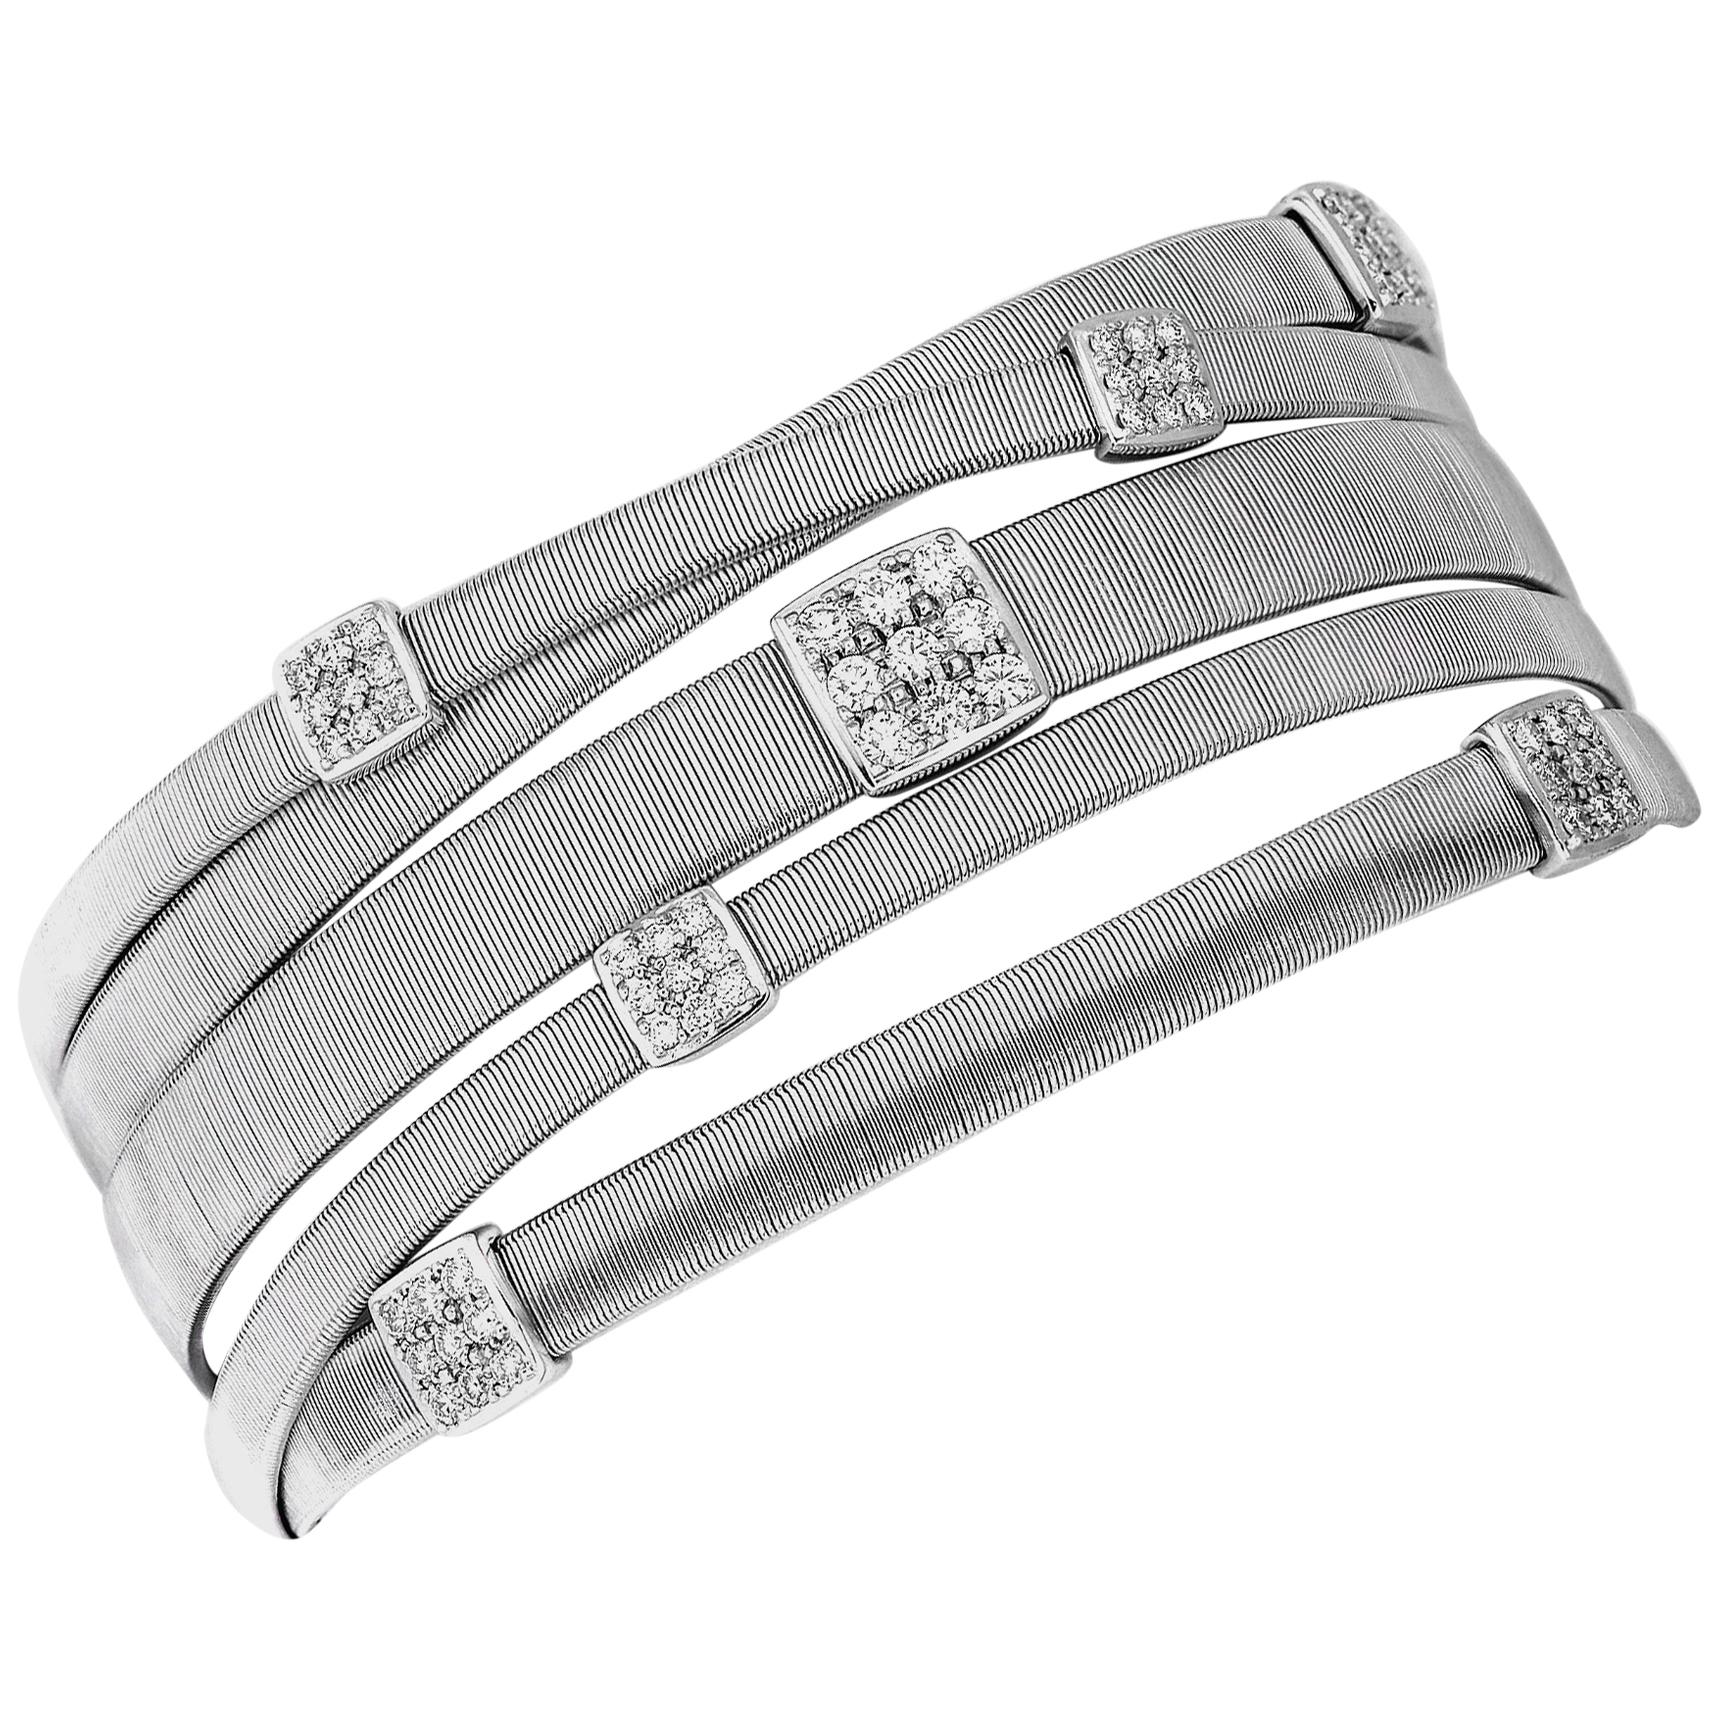 Round Cut Marco Bicego Five-Strand Maisai Bracelet with Diamonds in 18 Carat White Gold